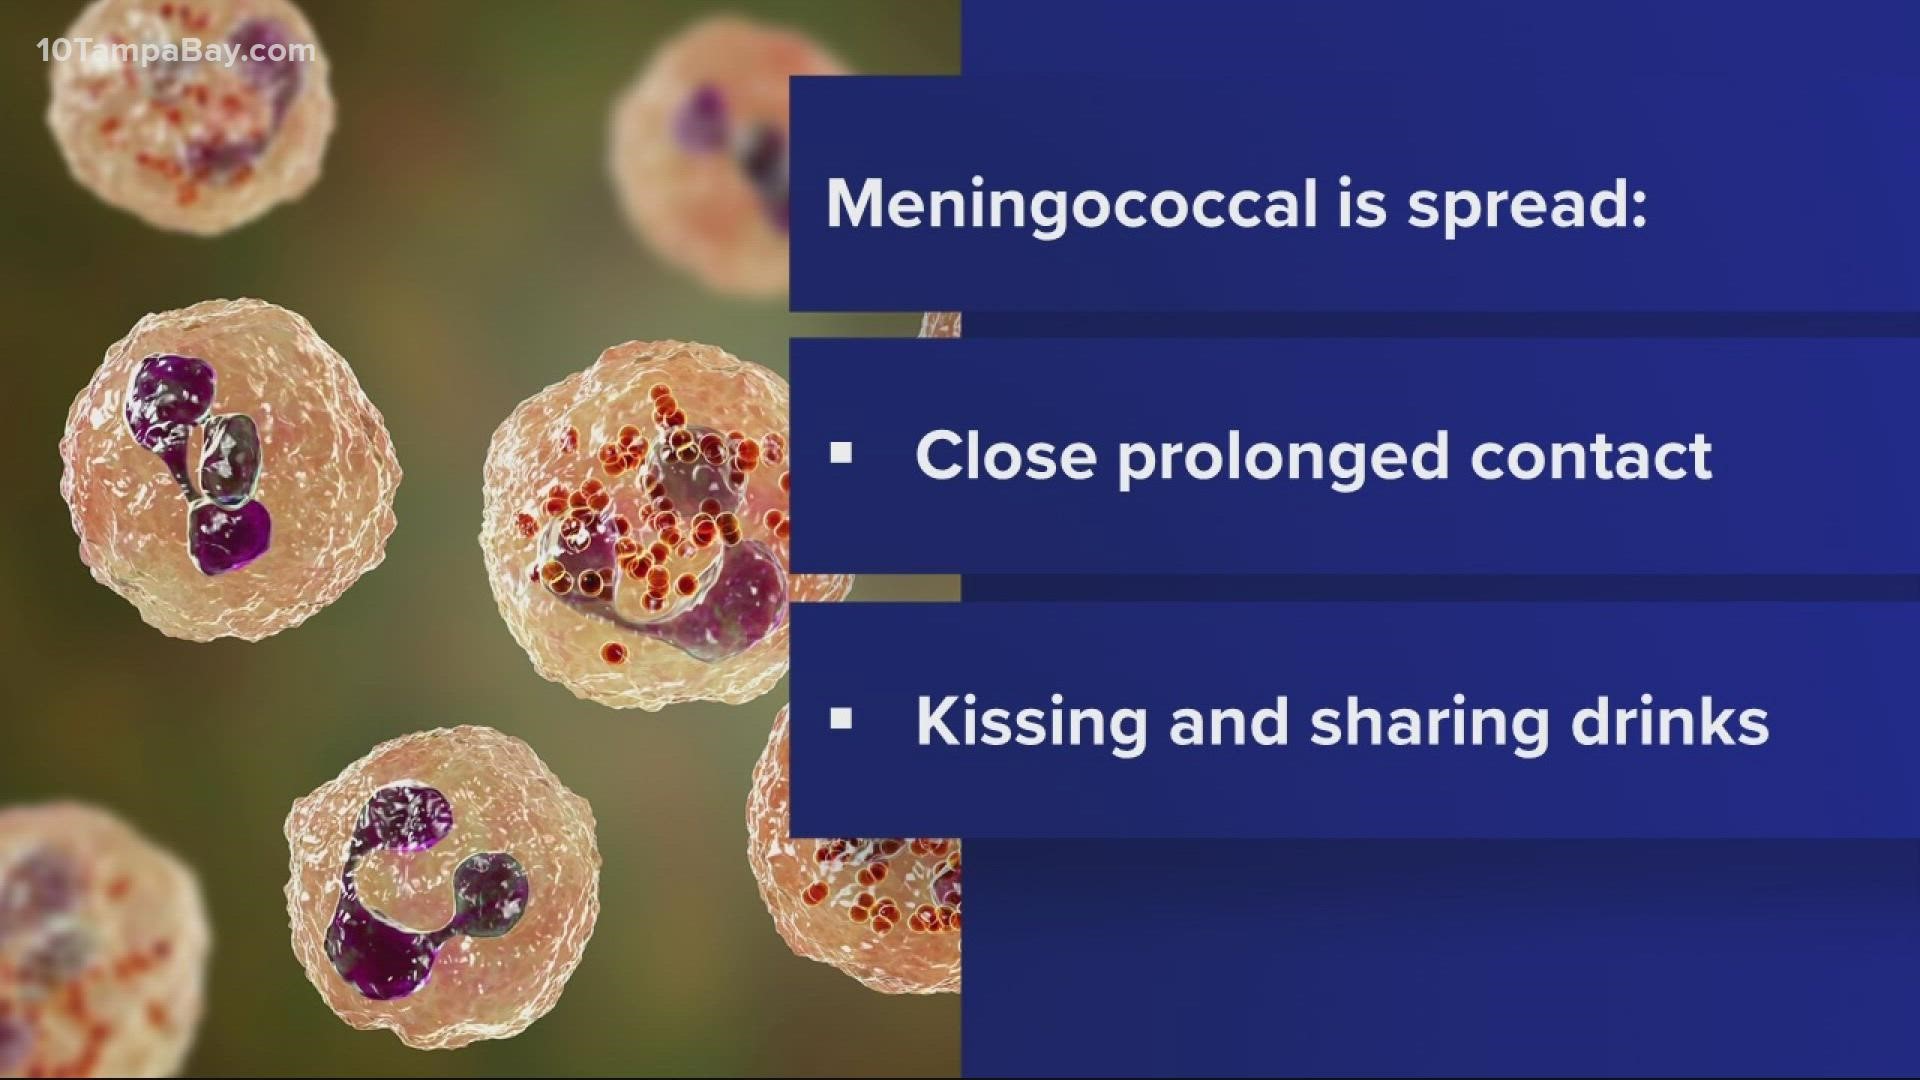 Meningococcal infections can be deadly.